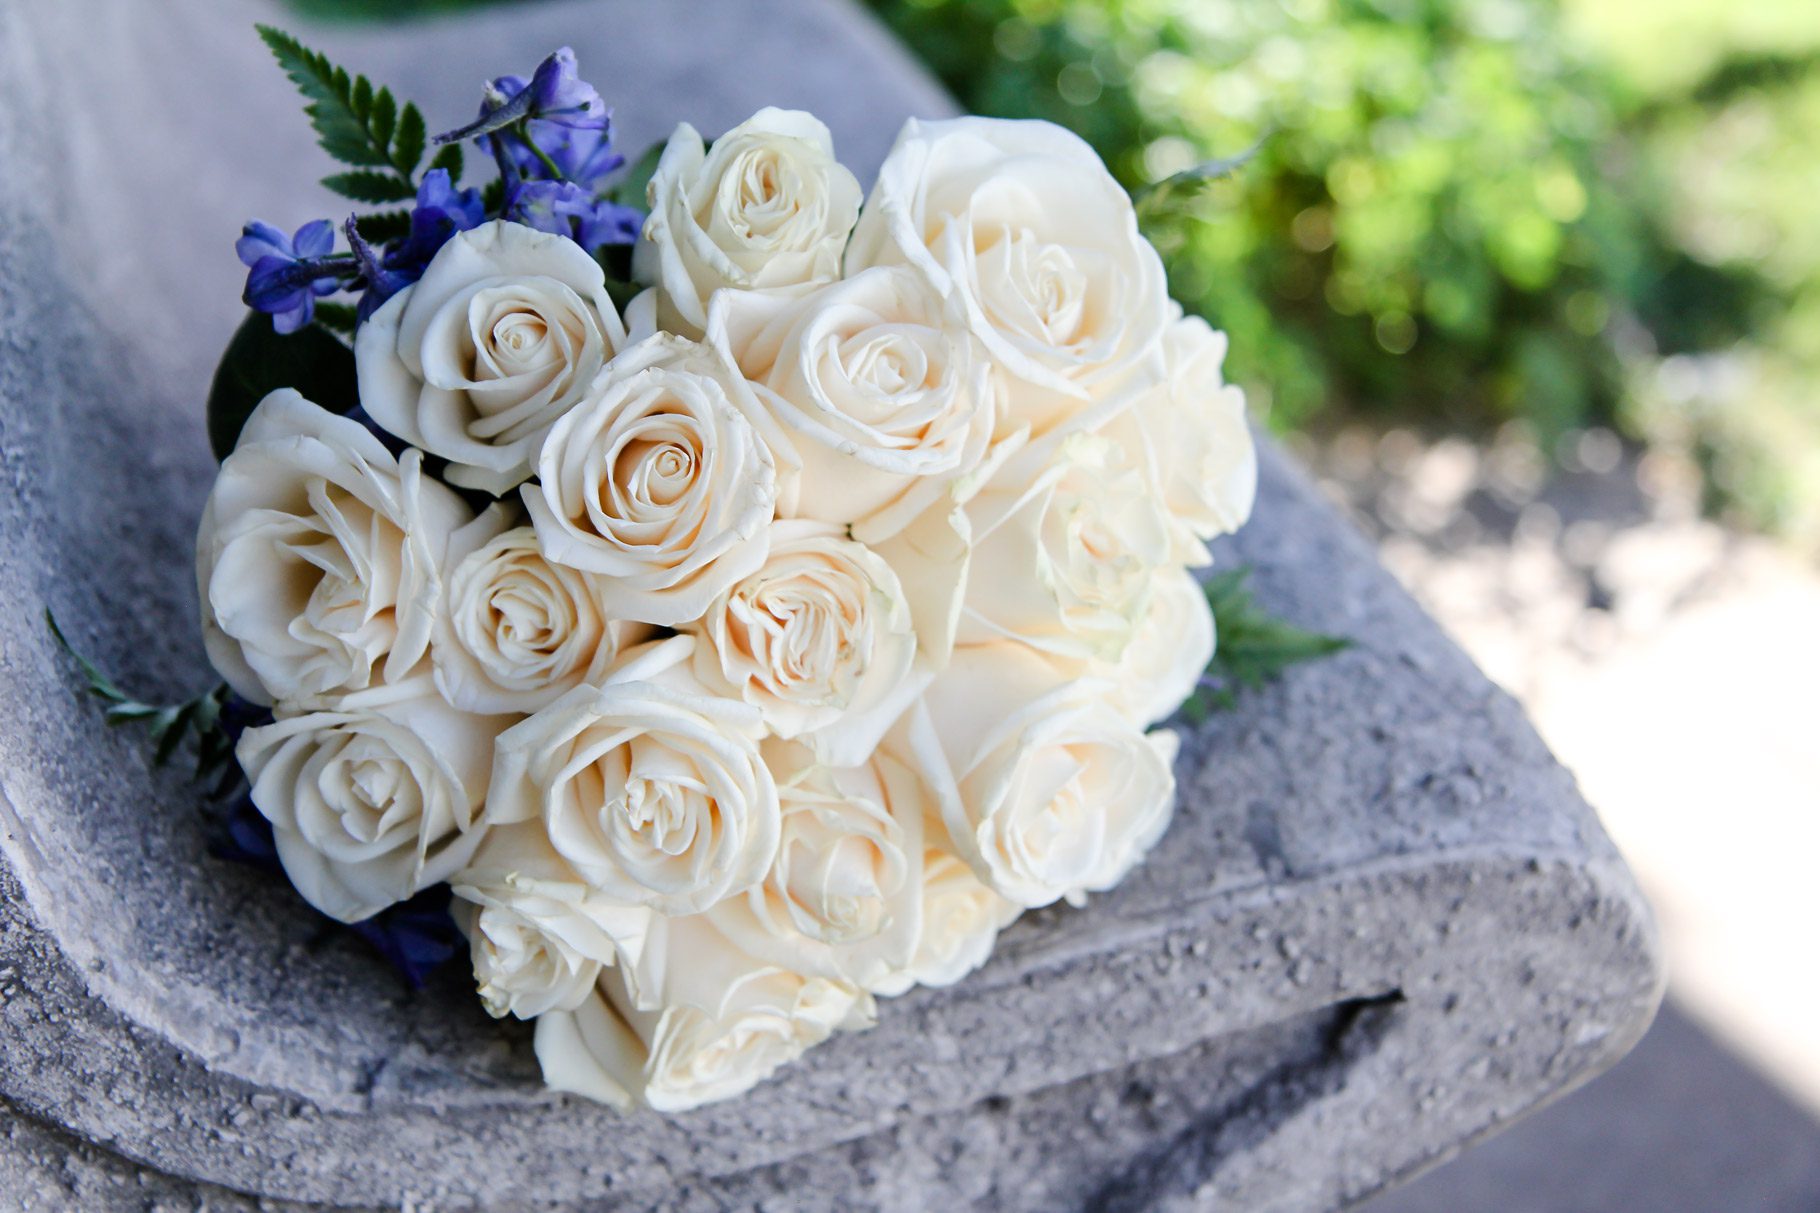 Detail image taken by wedding & quinceanera photographer Gina Ciaccio of a brides bouquet of white roses and lavender